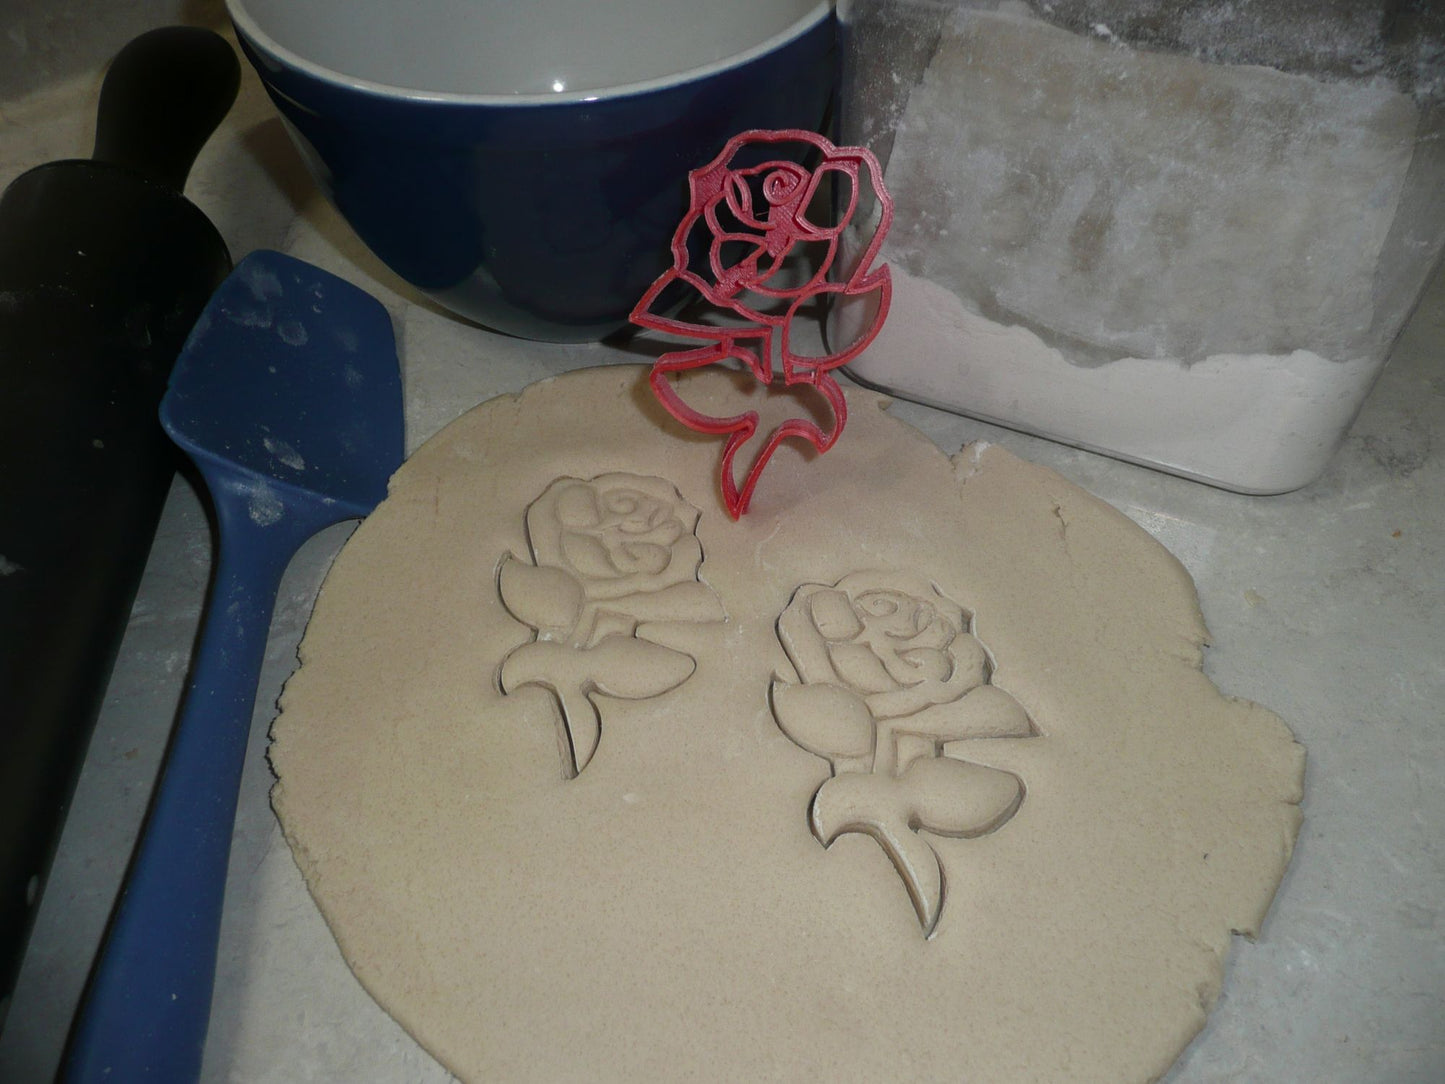 Rose With Stem Flower Plant Valentines Day Sweetheart Cookie Cutter USA PR2907